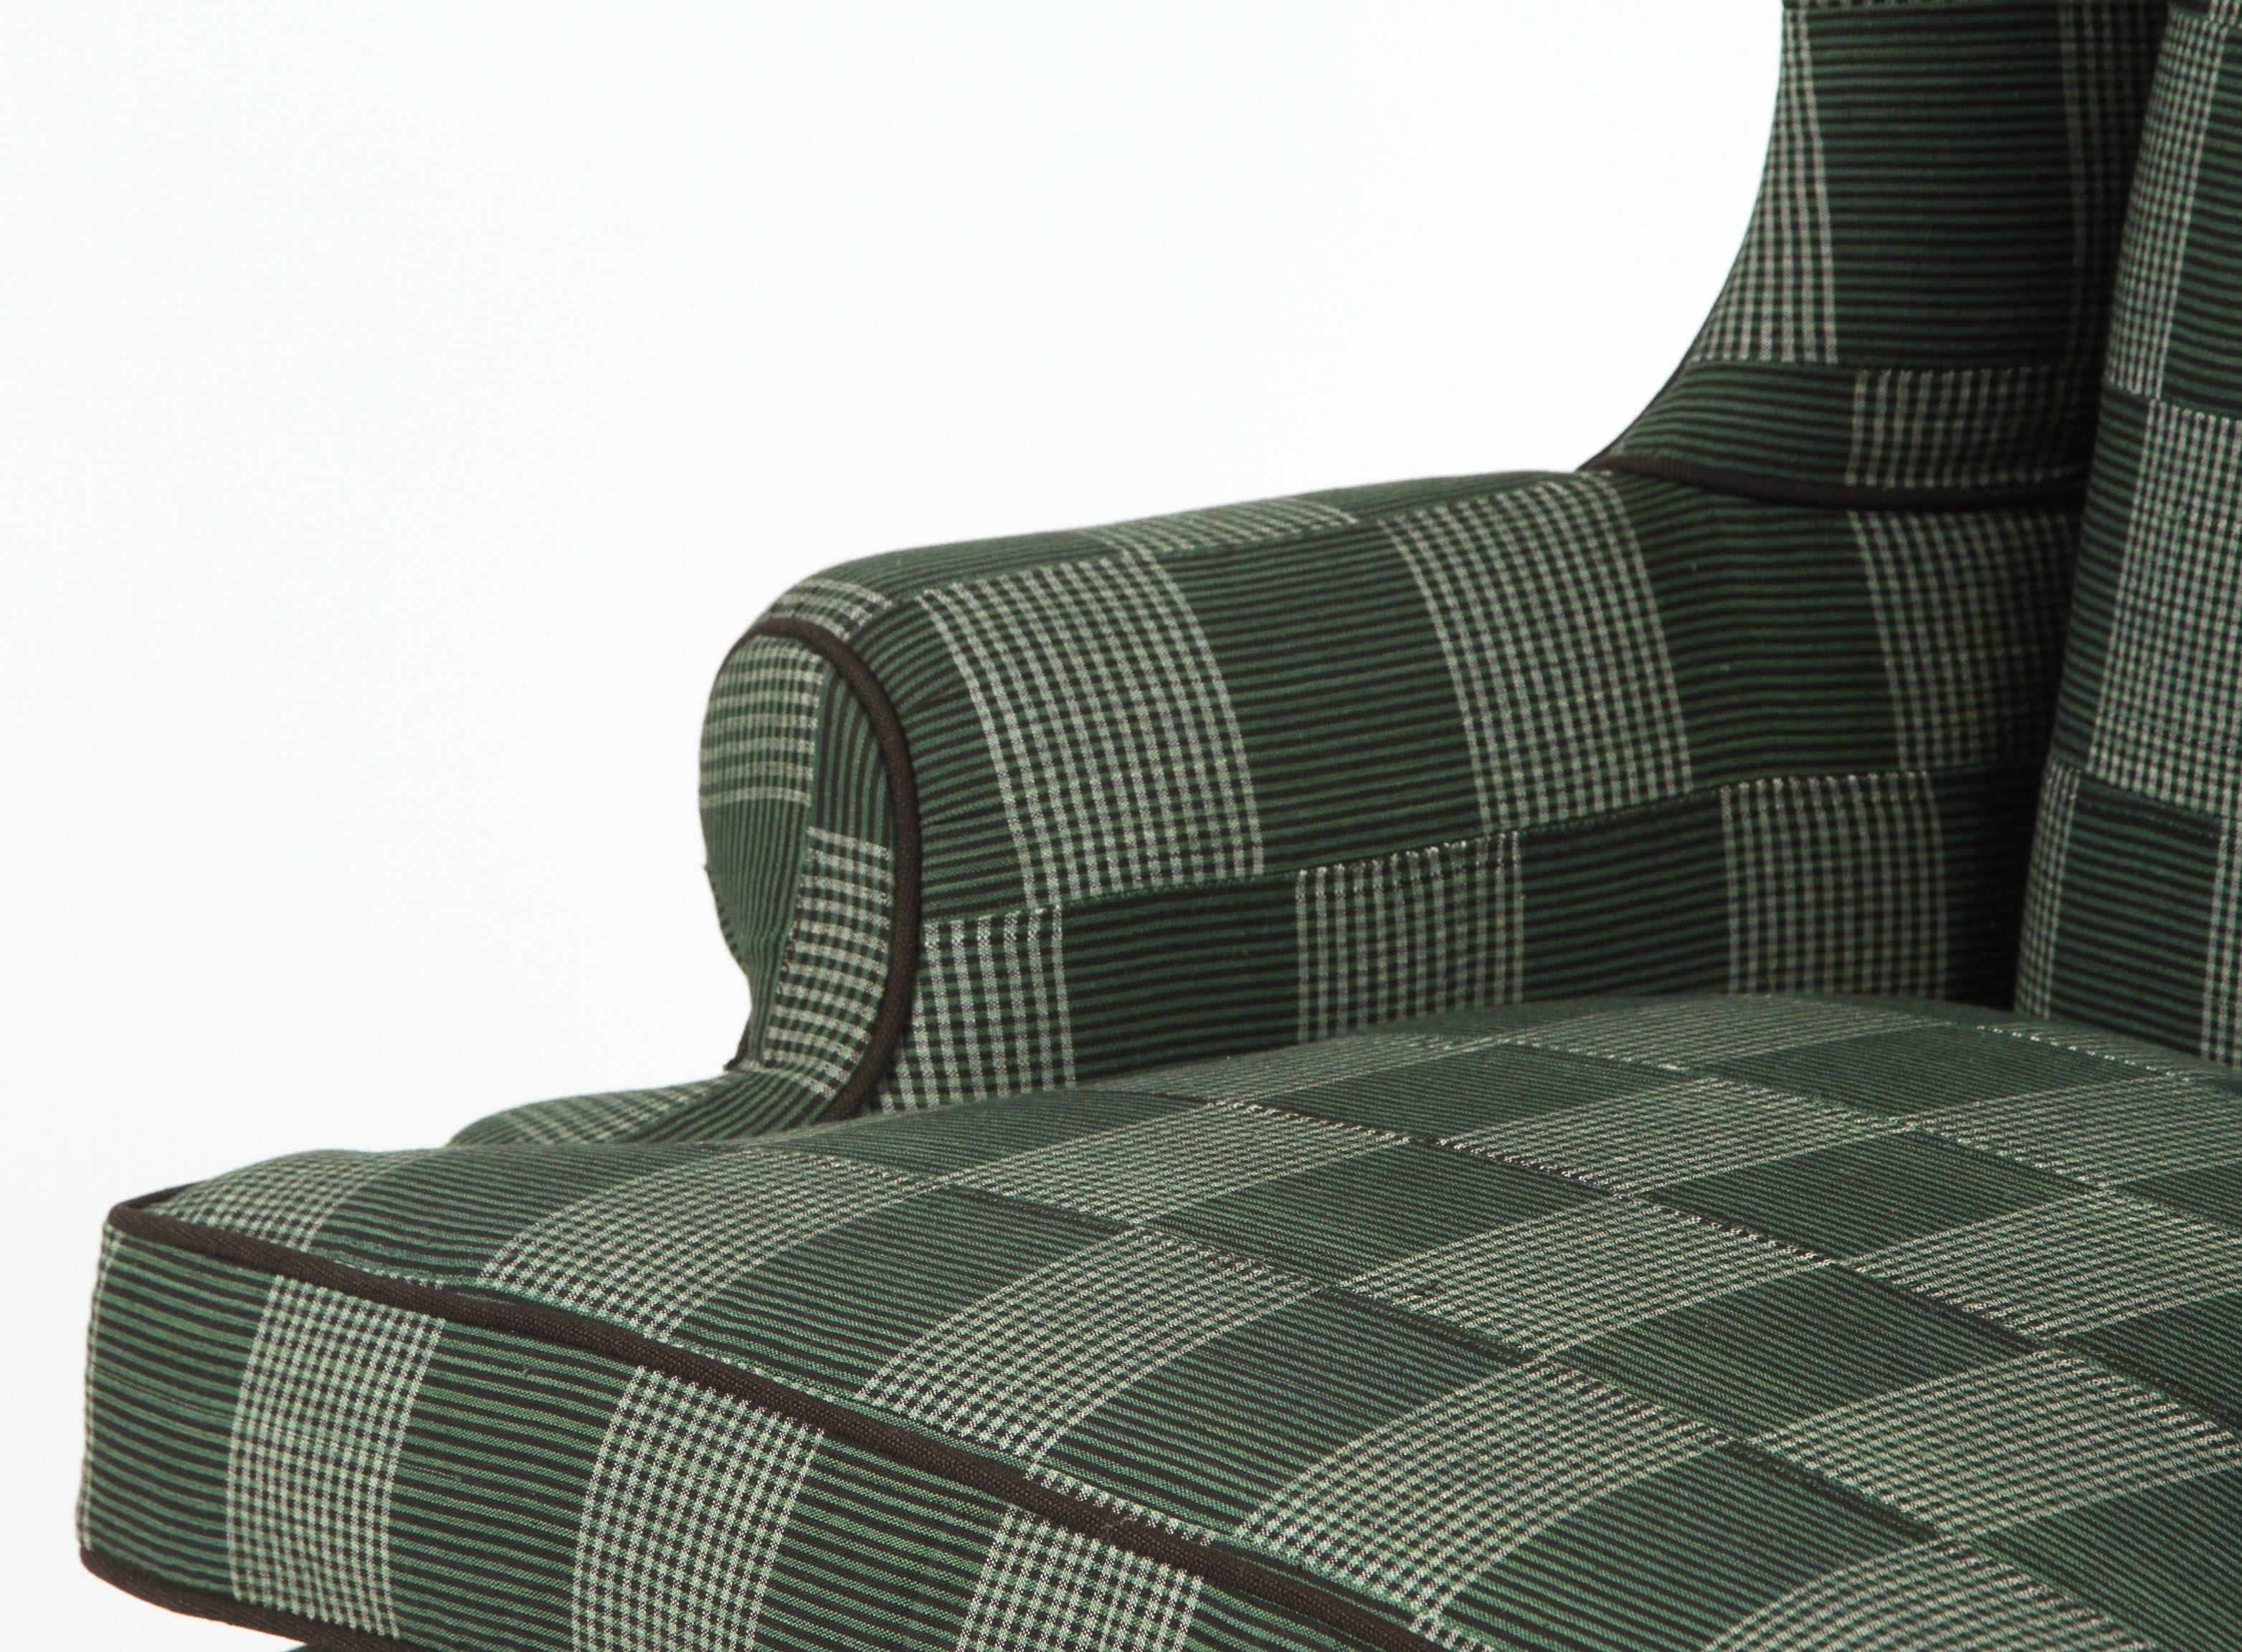 20th Century Classical Wing Chair Reupholstered in Green Plaid African Fabric